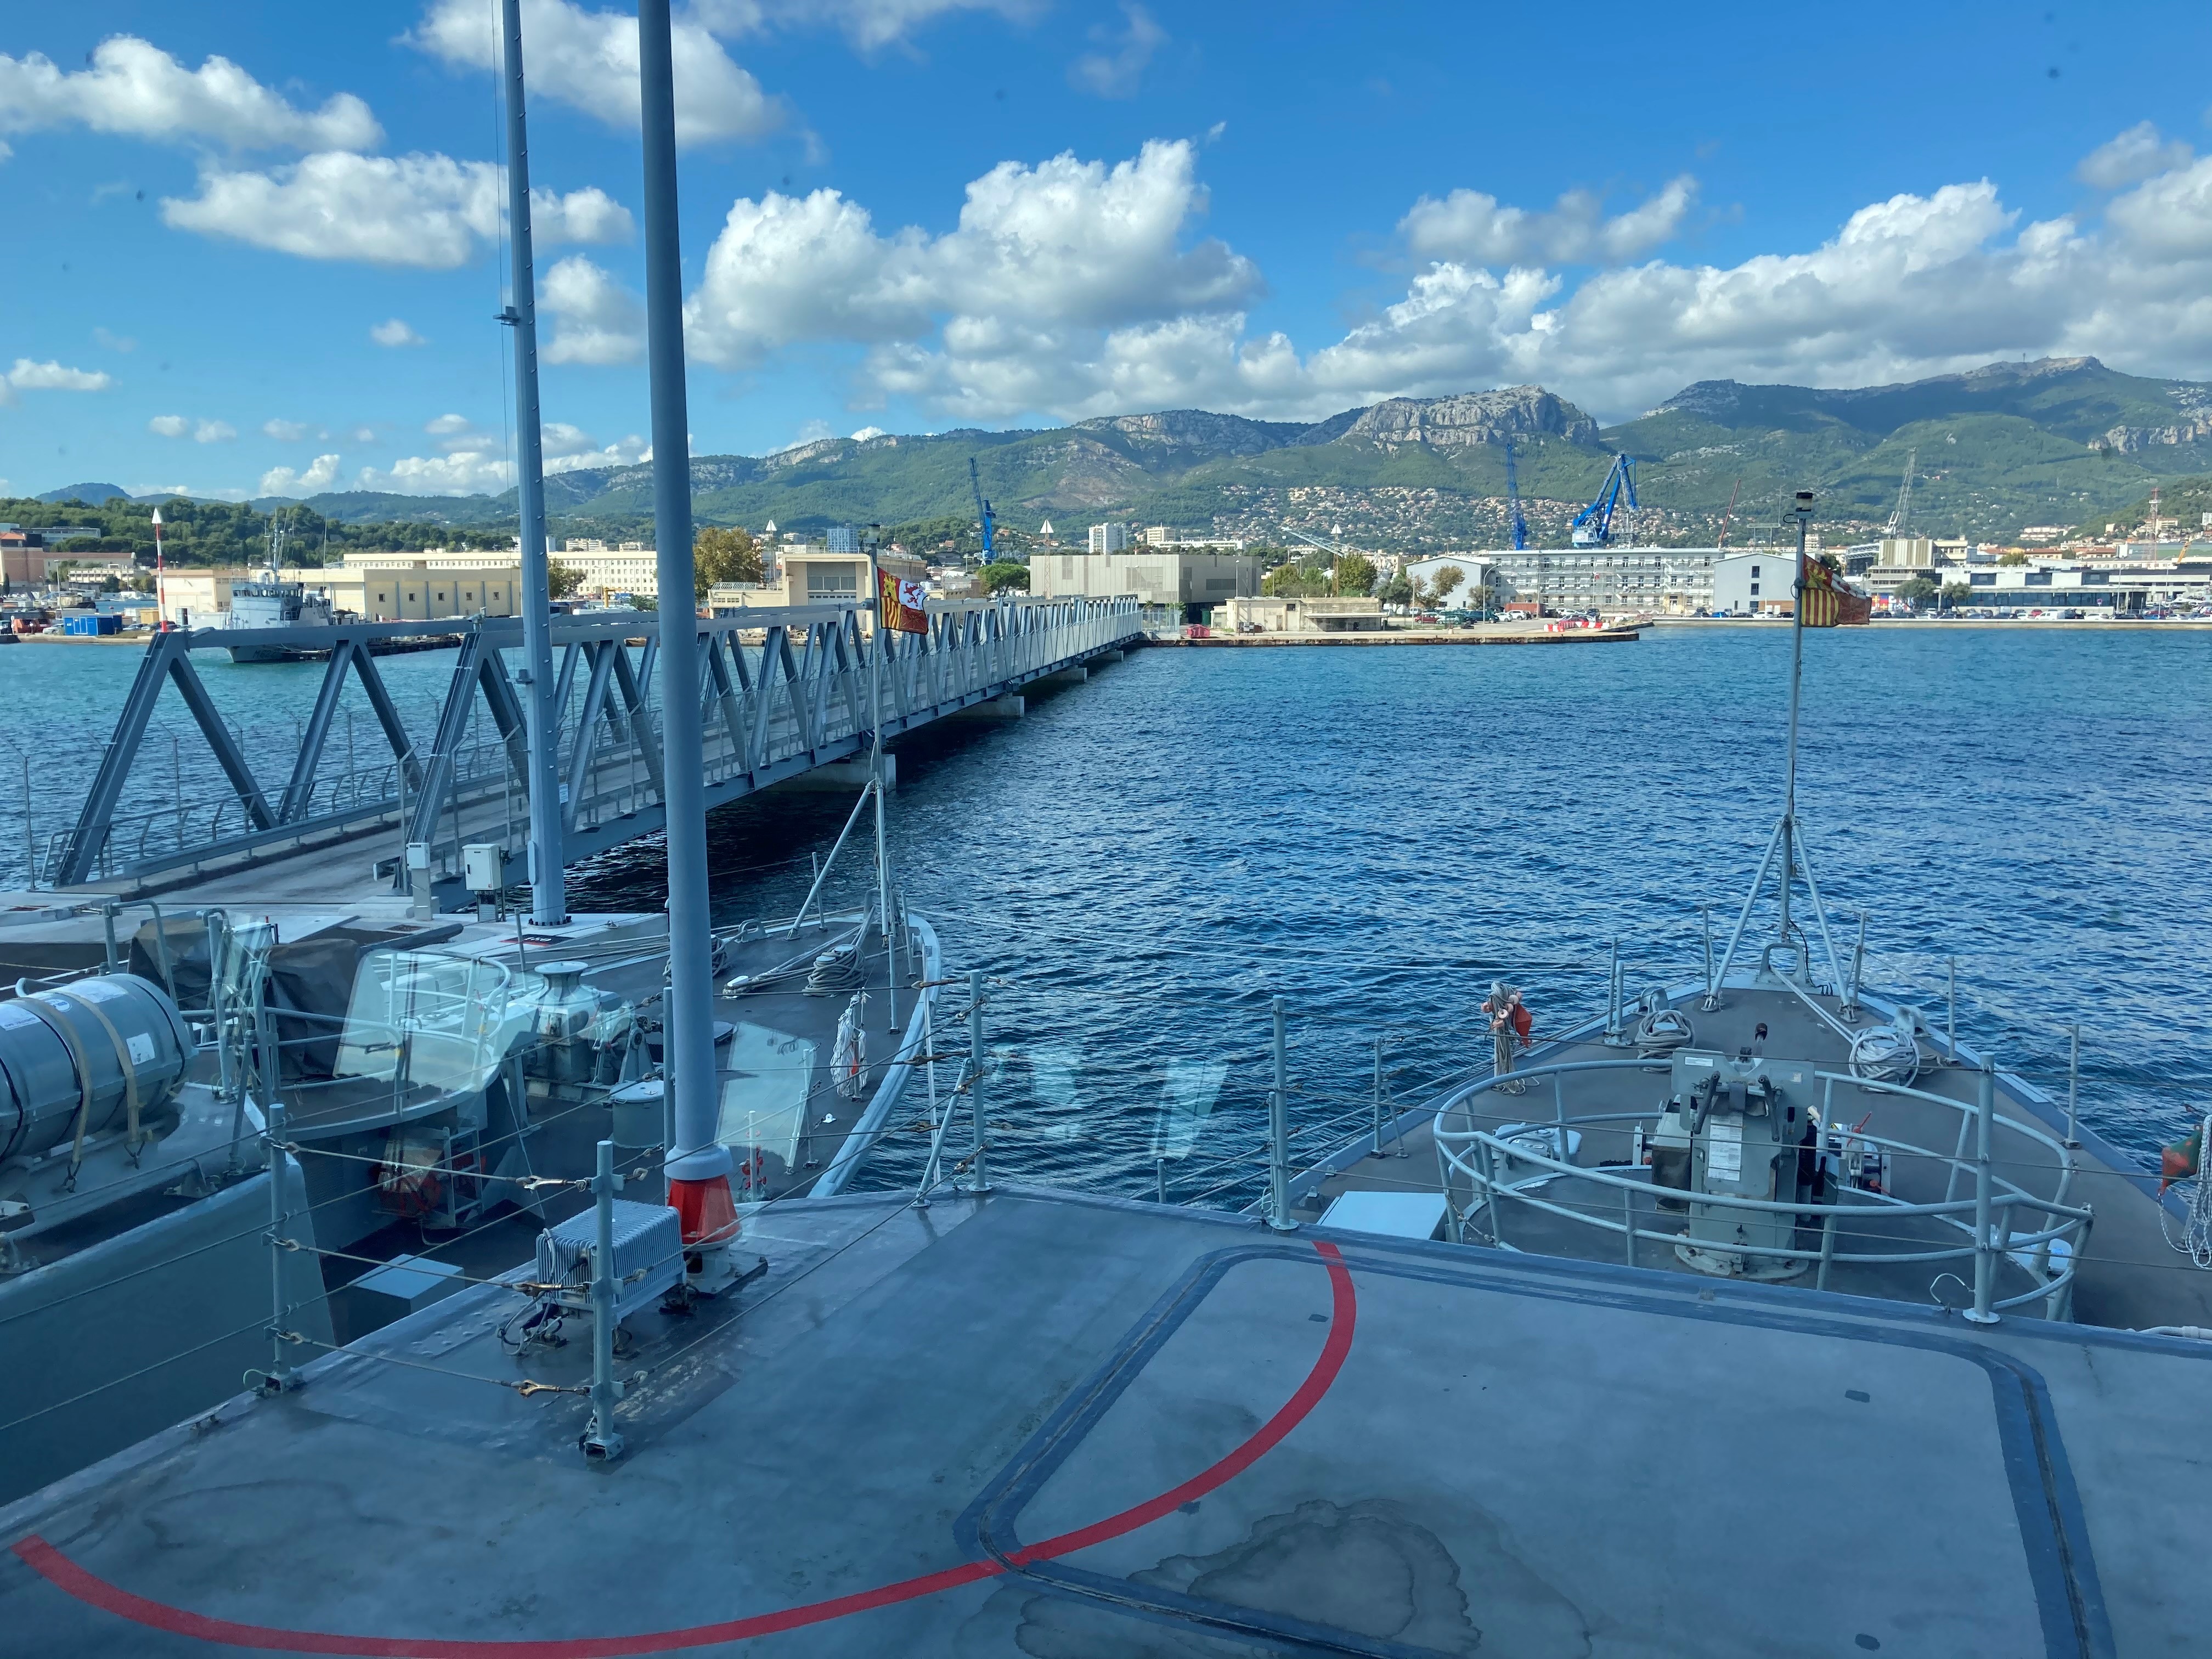 Minehunters at naval base in Toulon